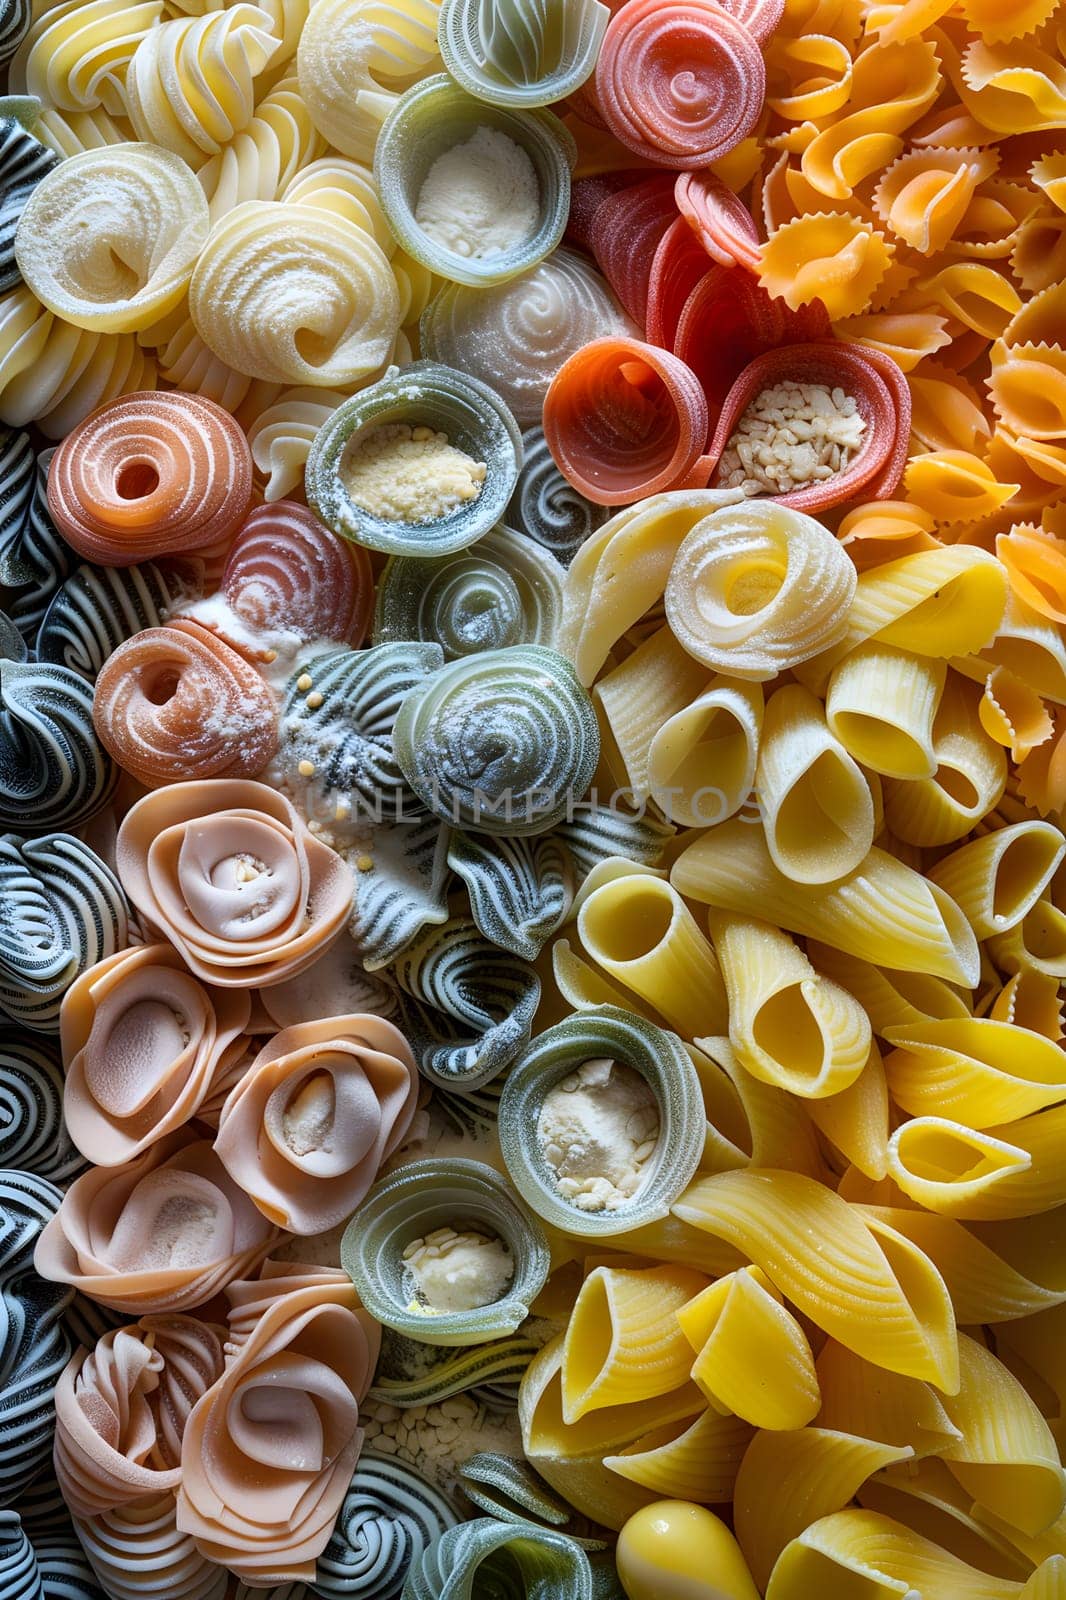 Pasta, a comfort food, comes in many colors and shapes by Nadtochiy